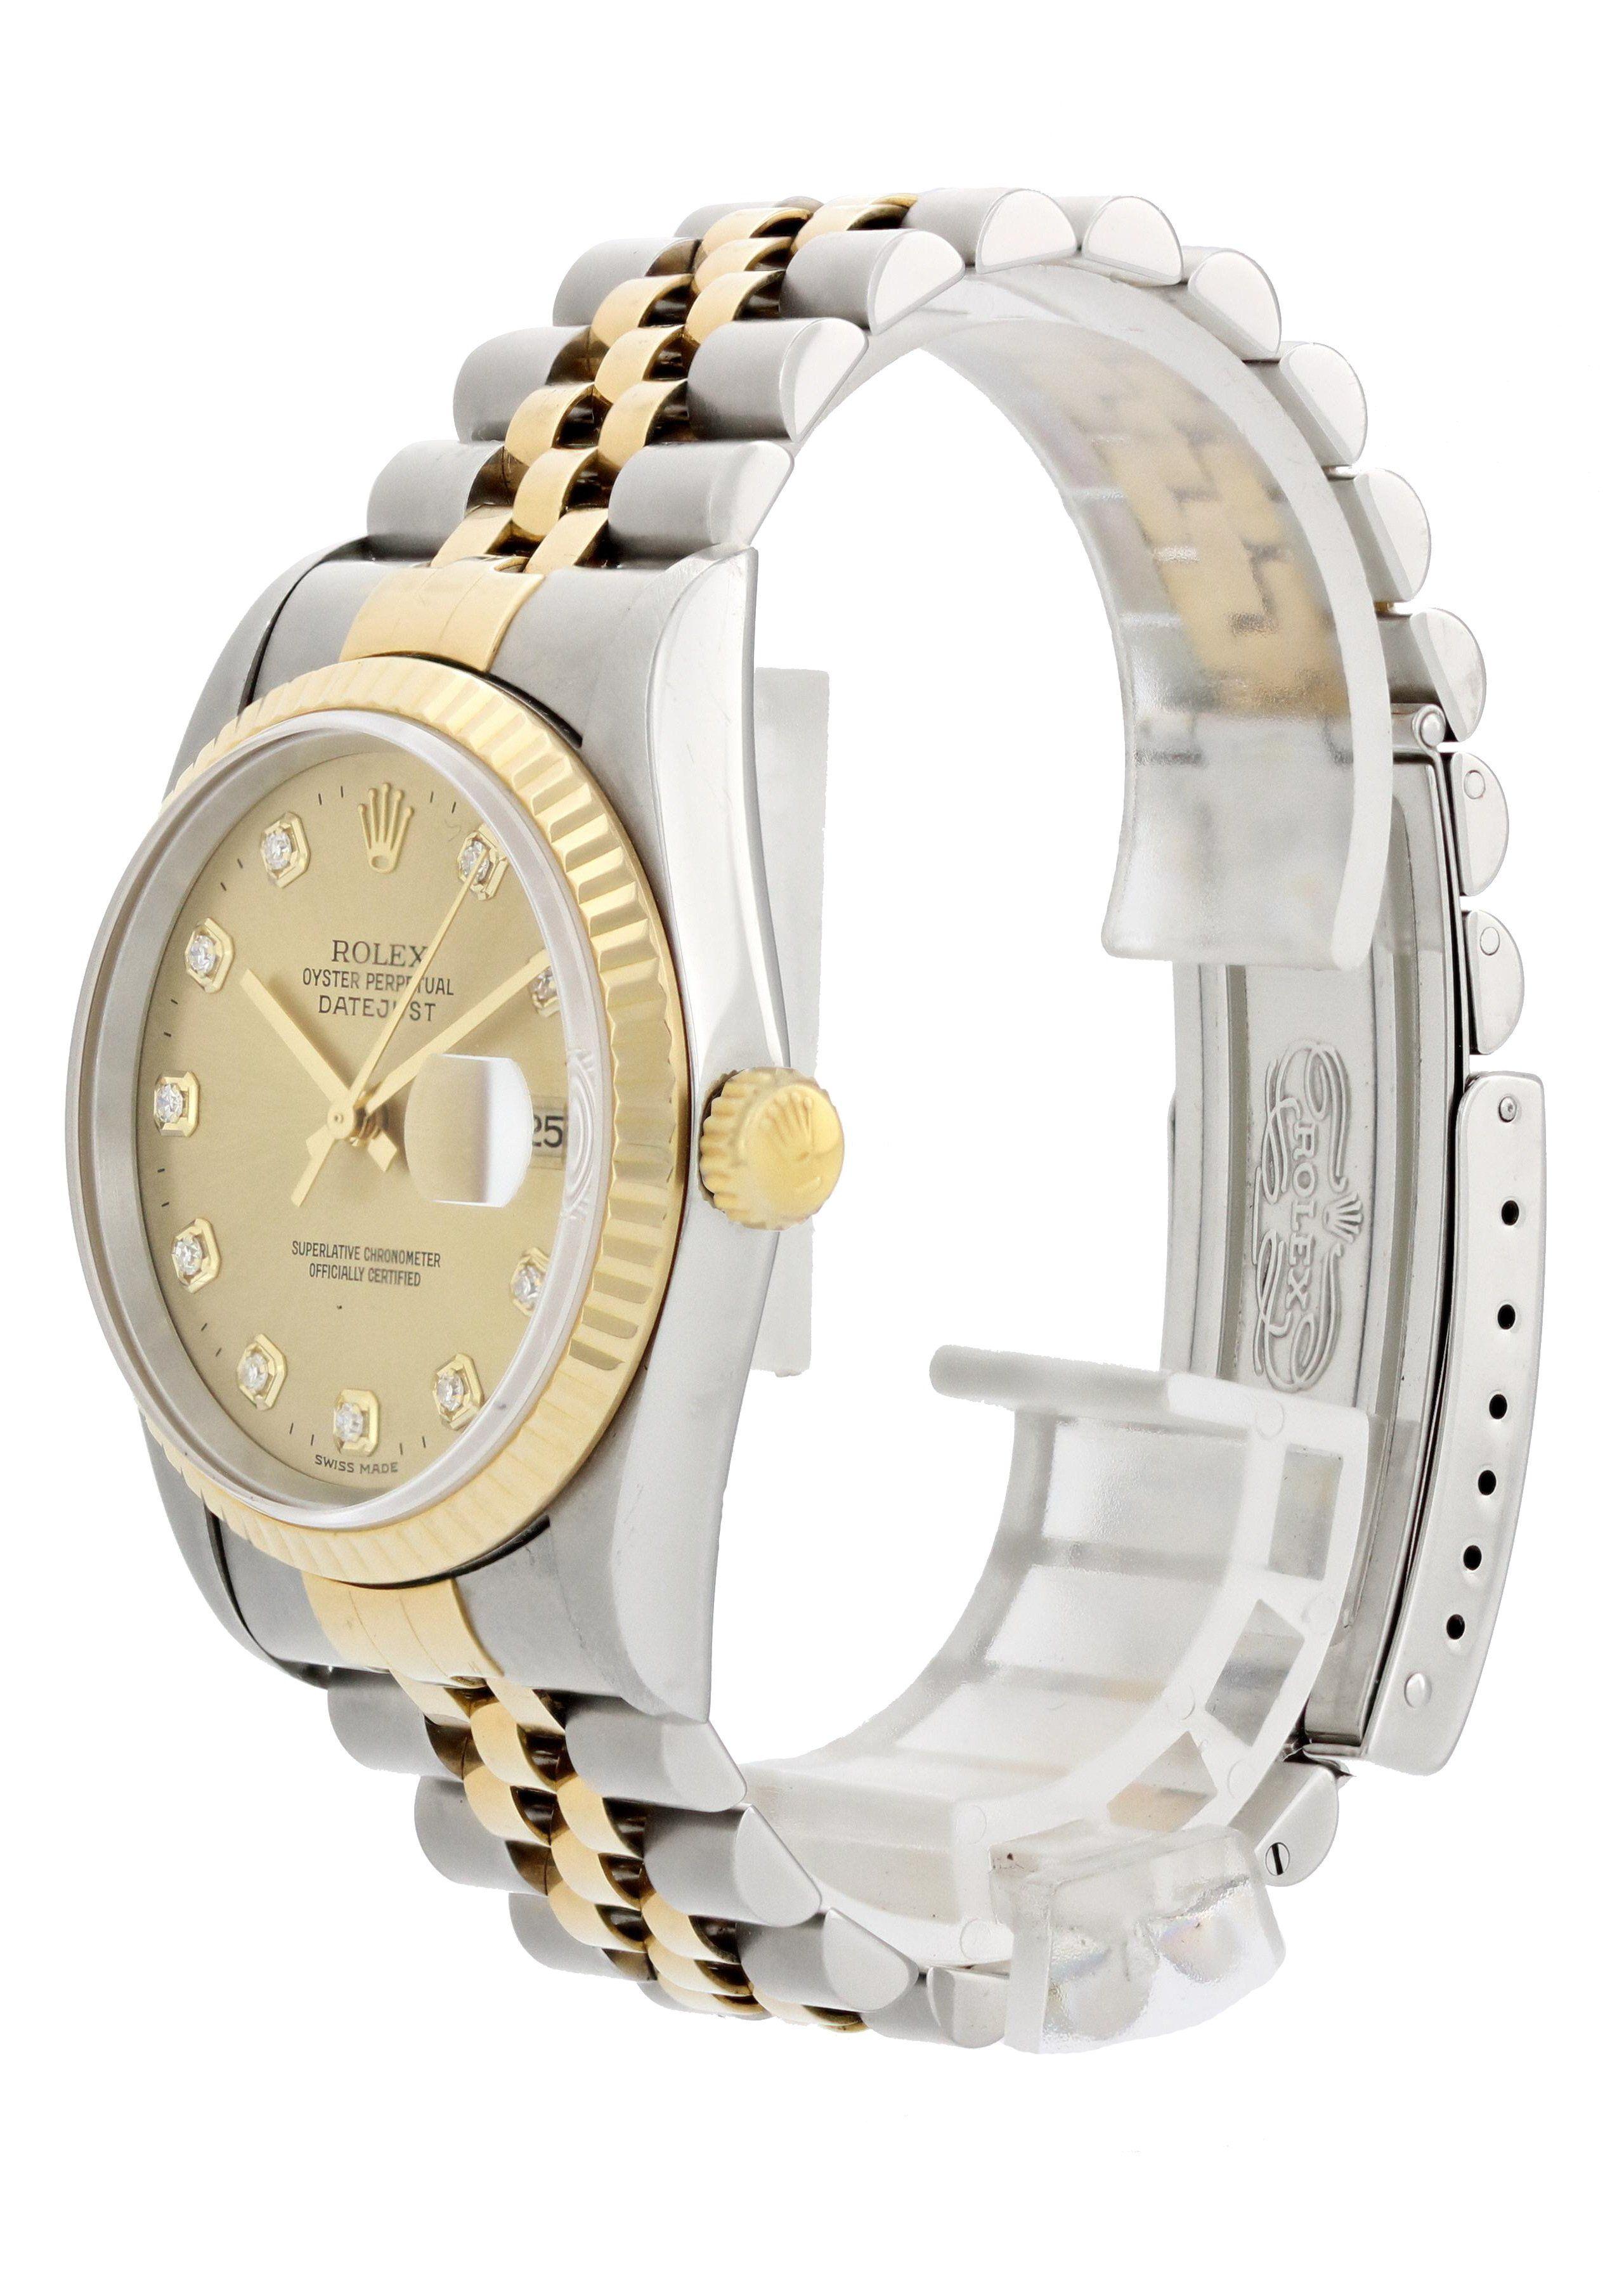 Rolex Datejust 16233 Men's Watch. 
36mm Stainless Steel case. 
Fluted Yellow Gold Stationary bezel. 
Champagne dial with gold hands and factory set diamond hour markers. 
Minute markers on the outer dial. 
Date display at the 3 o'clock position.